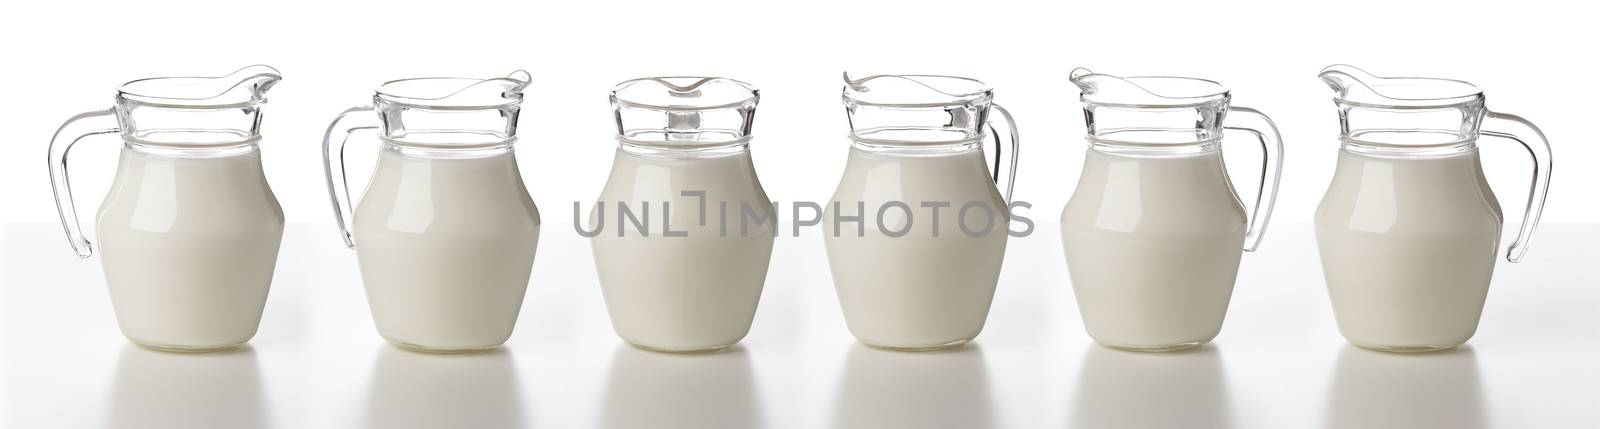 Glass jug of milk isolated on white background, collection by xamtiw